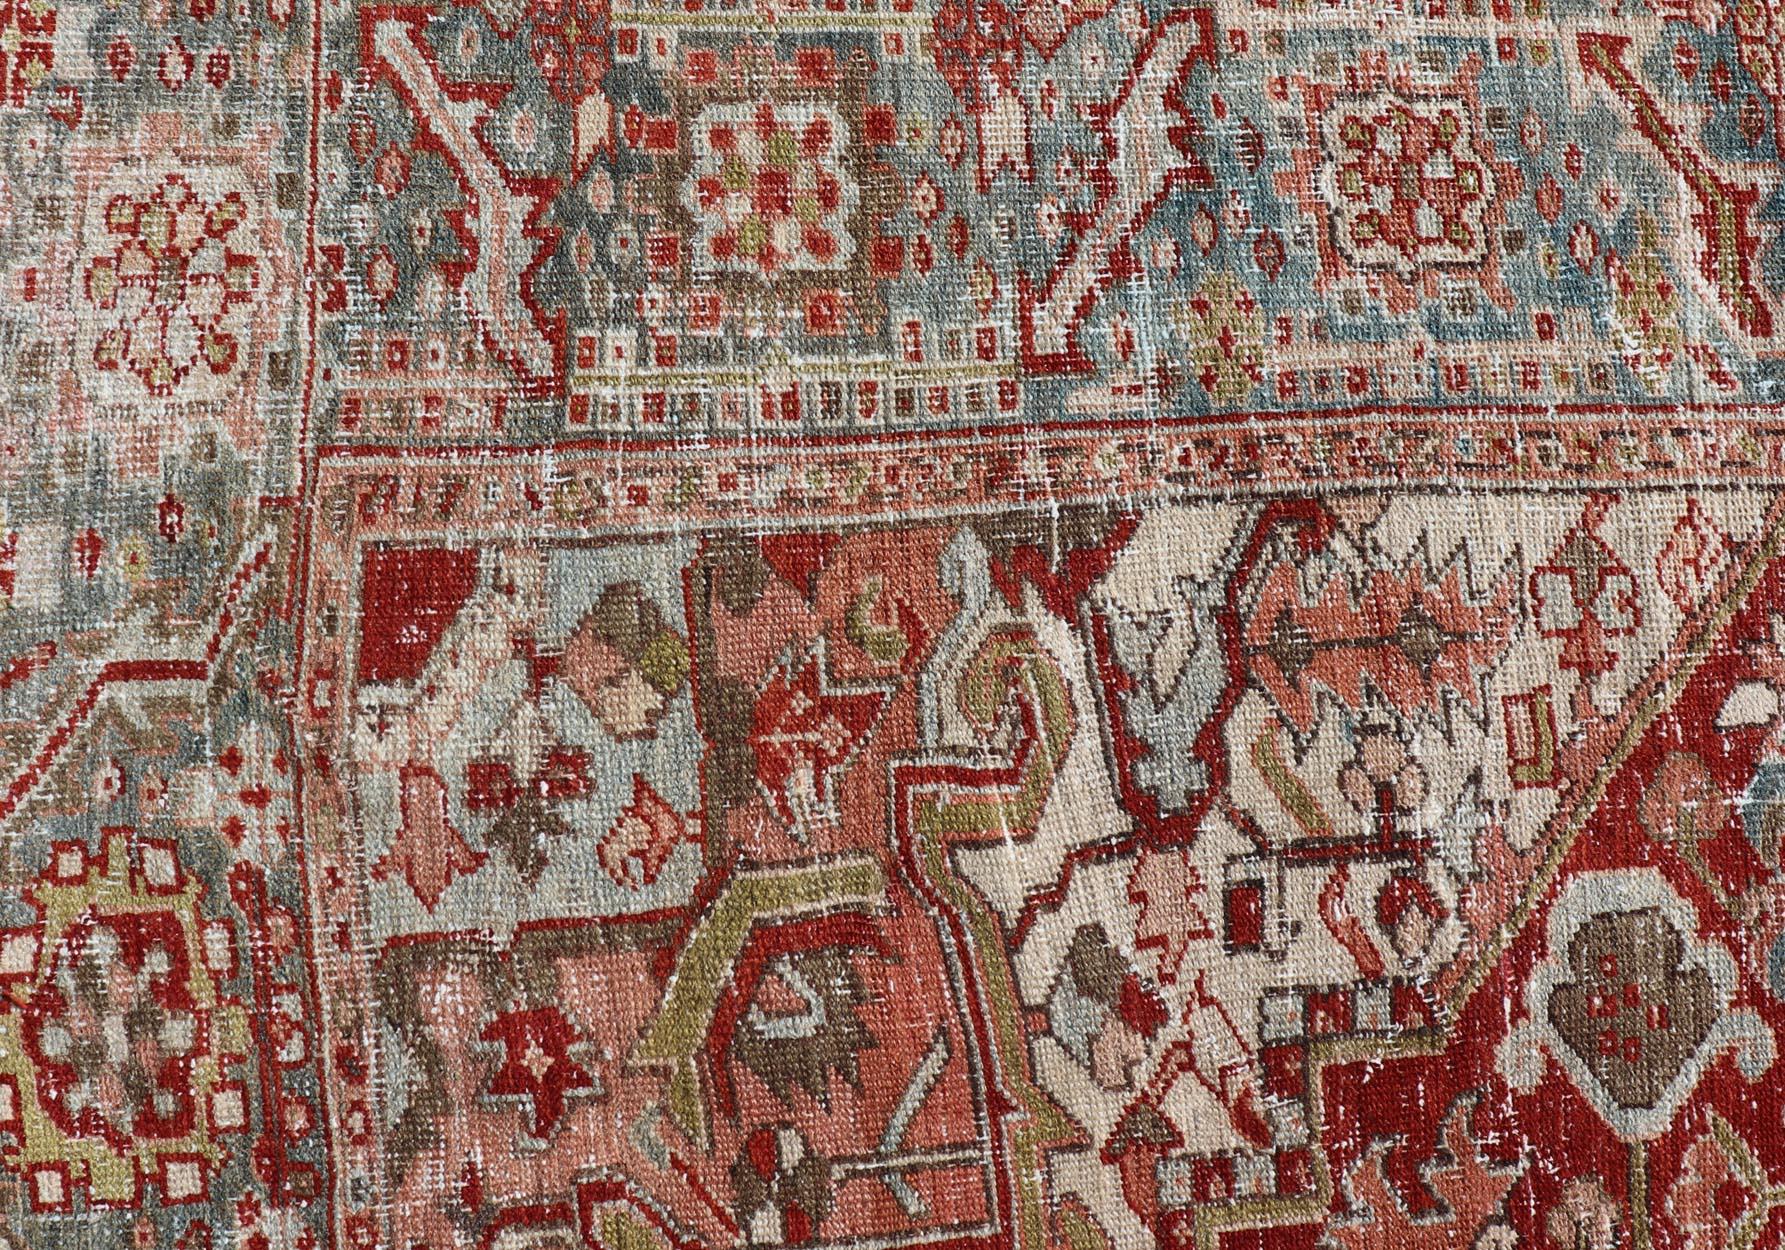  Antique Persian Heriz Rug With Geometric Medallion Design in Red & Soft Colors. Antique Persian Heriz Rug with Geometric Medallion Design. Keivan Woven Arts/ Rug/ EMB-22193-15100, Country/type/ Persian Rug, Heriz. 

     Measures: 6'10 x 9'6

Made